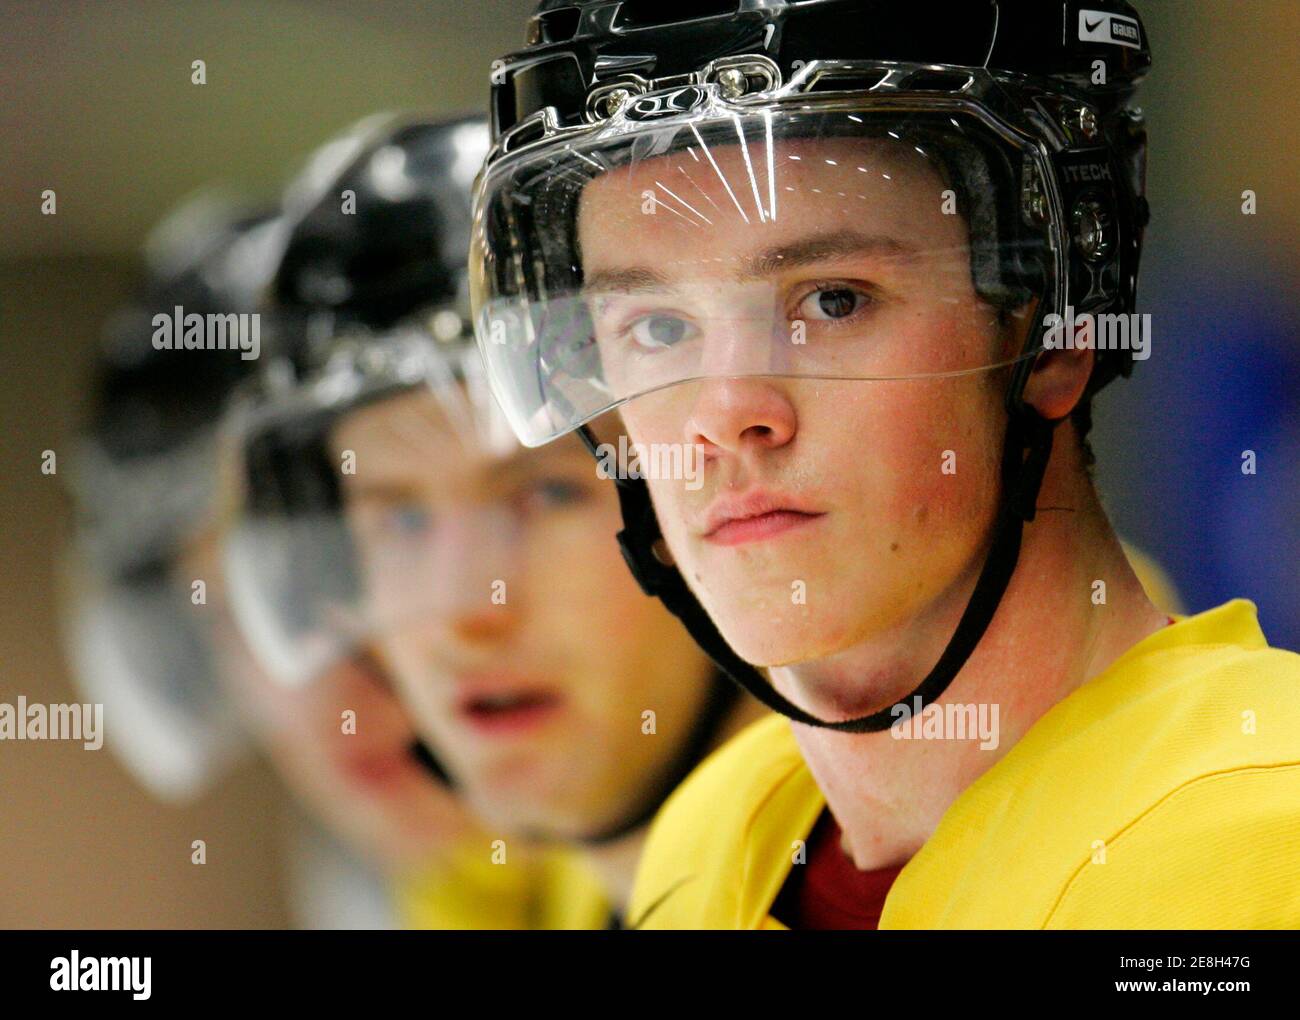 Canada's Jonathan Toews (R) participates in his team's practice session at  the 2007 IIHF World Junior Hockey Championships in Leksand, Sweden, January  2, 2007. REUTERS/Shaun Best (SWEDEN Stock Photo - Alamy